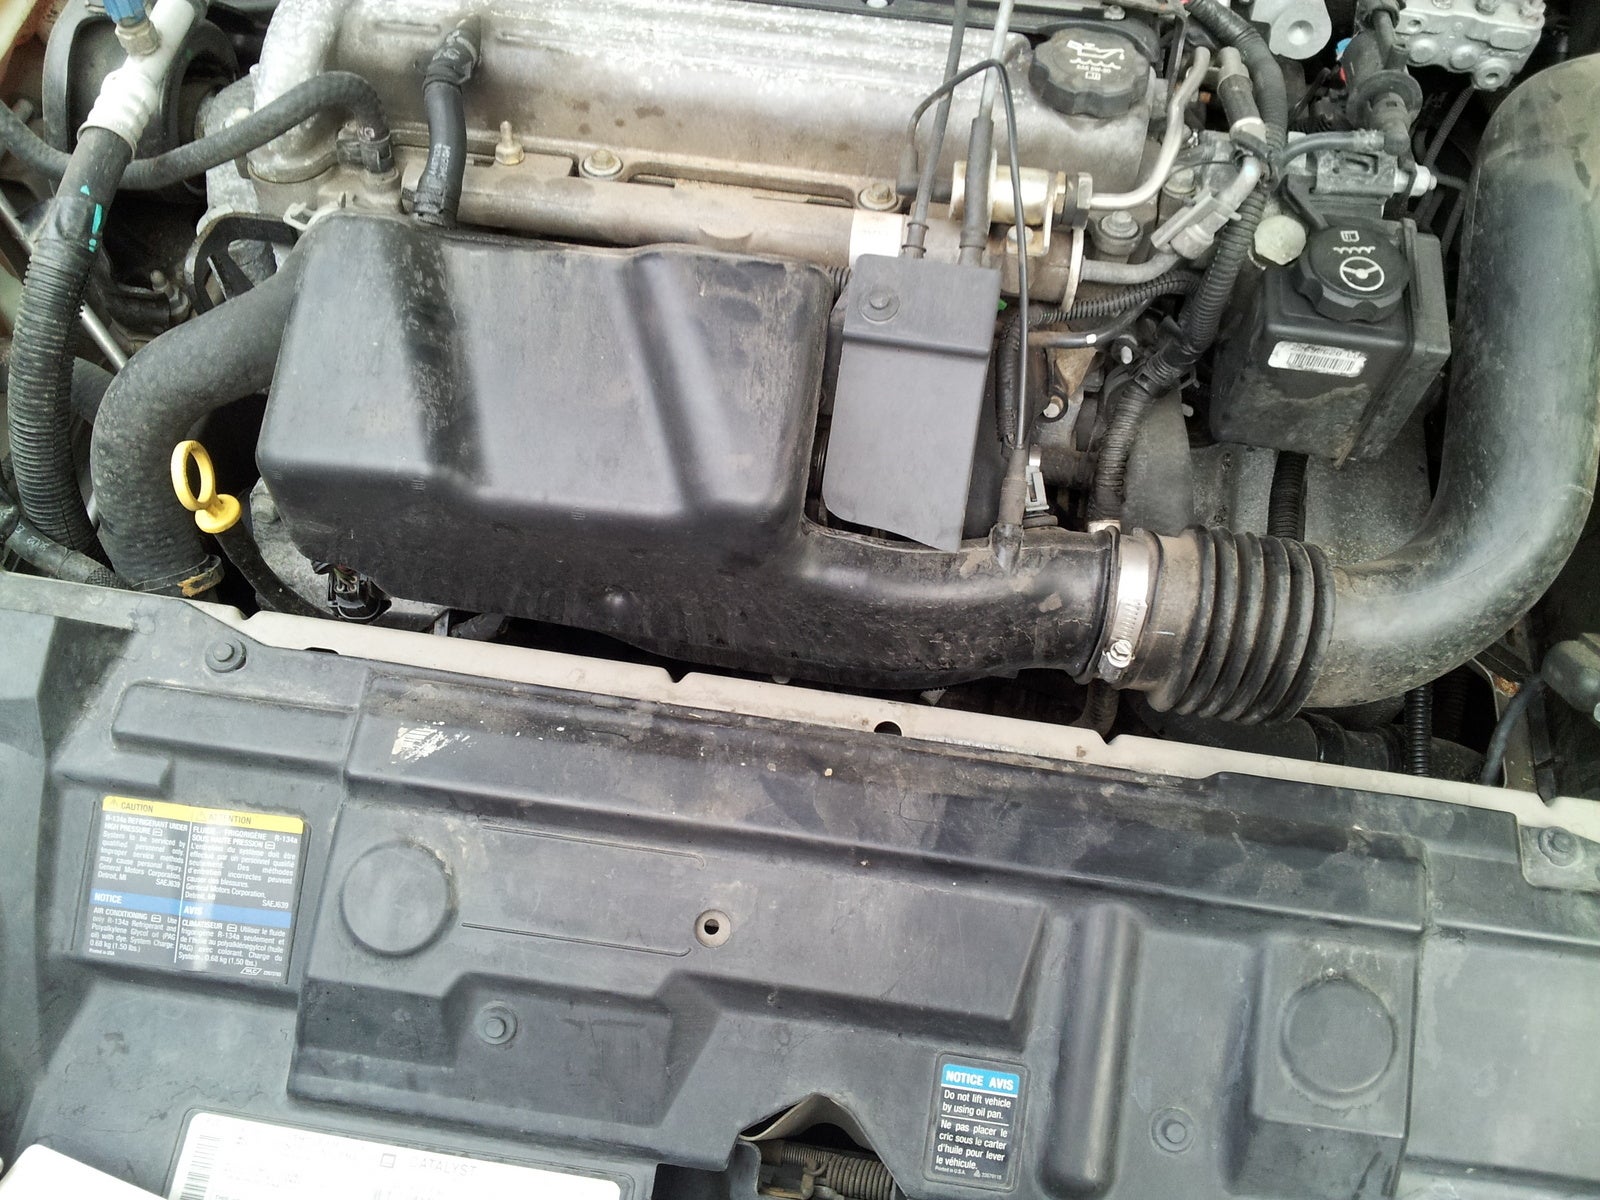 Chevrolet Cavalier Questions - What is this part called 